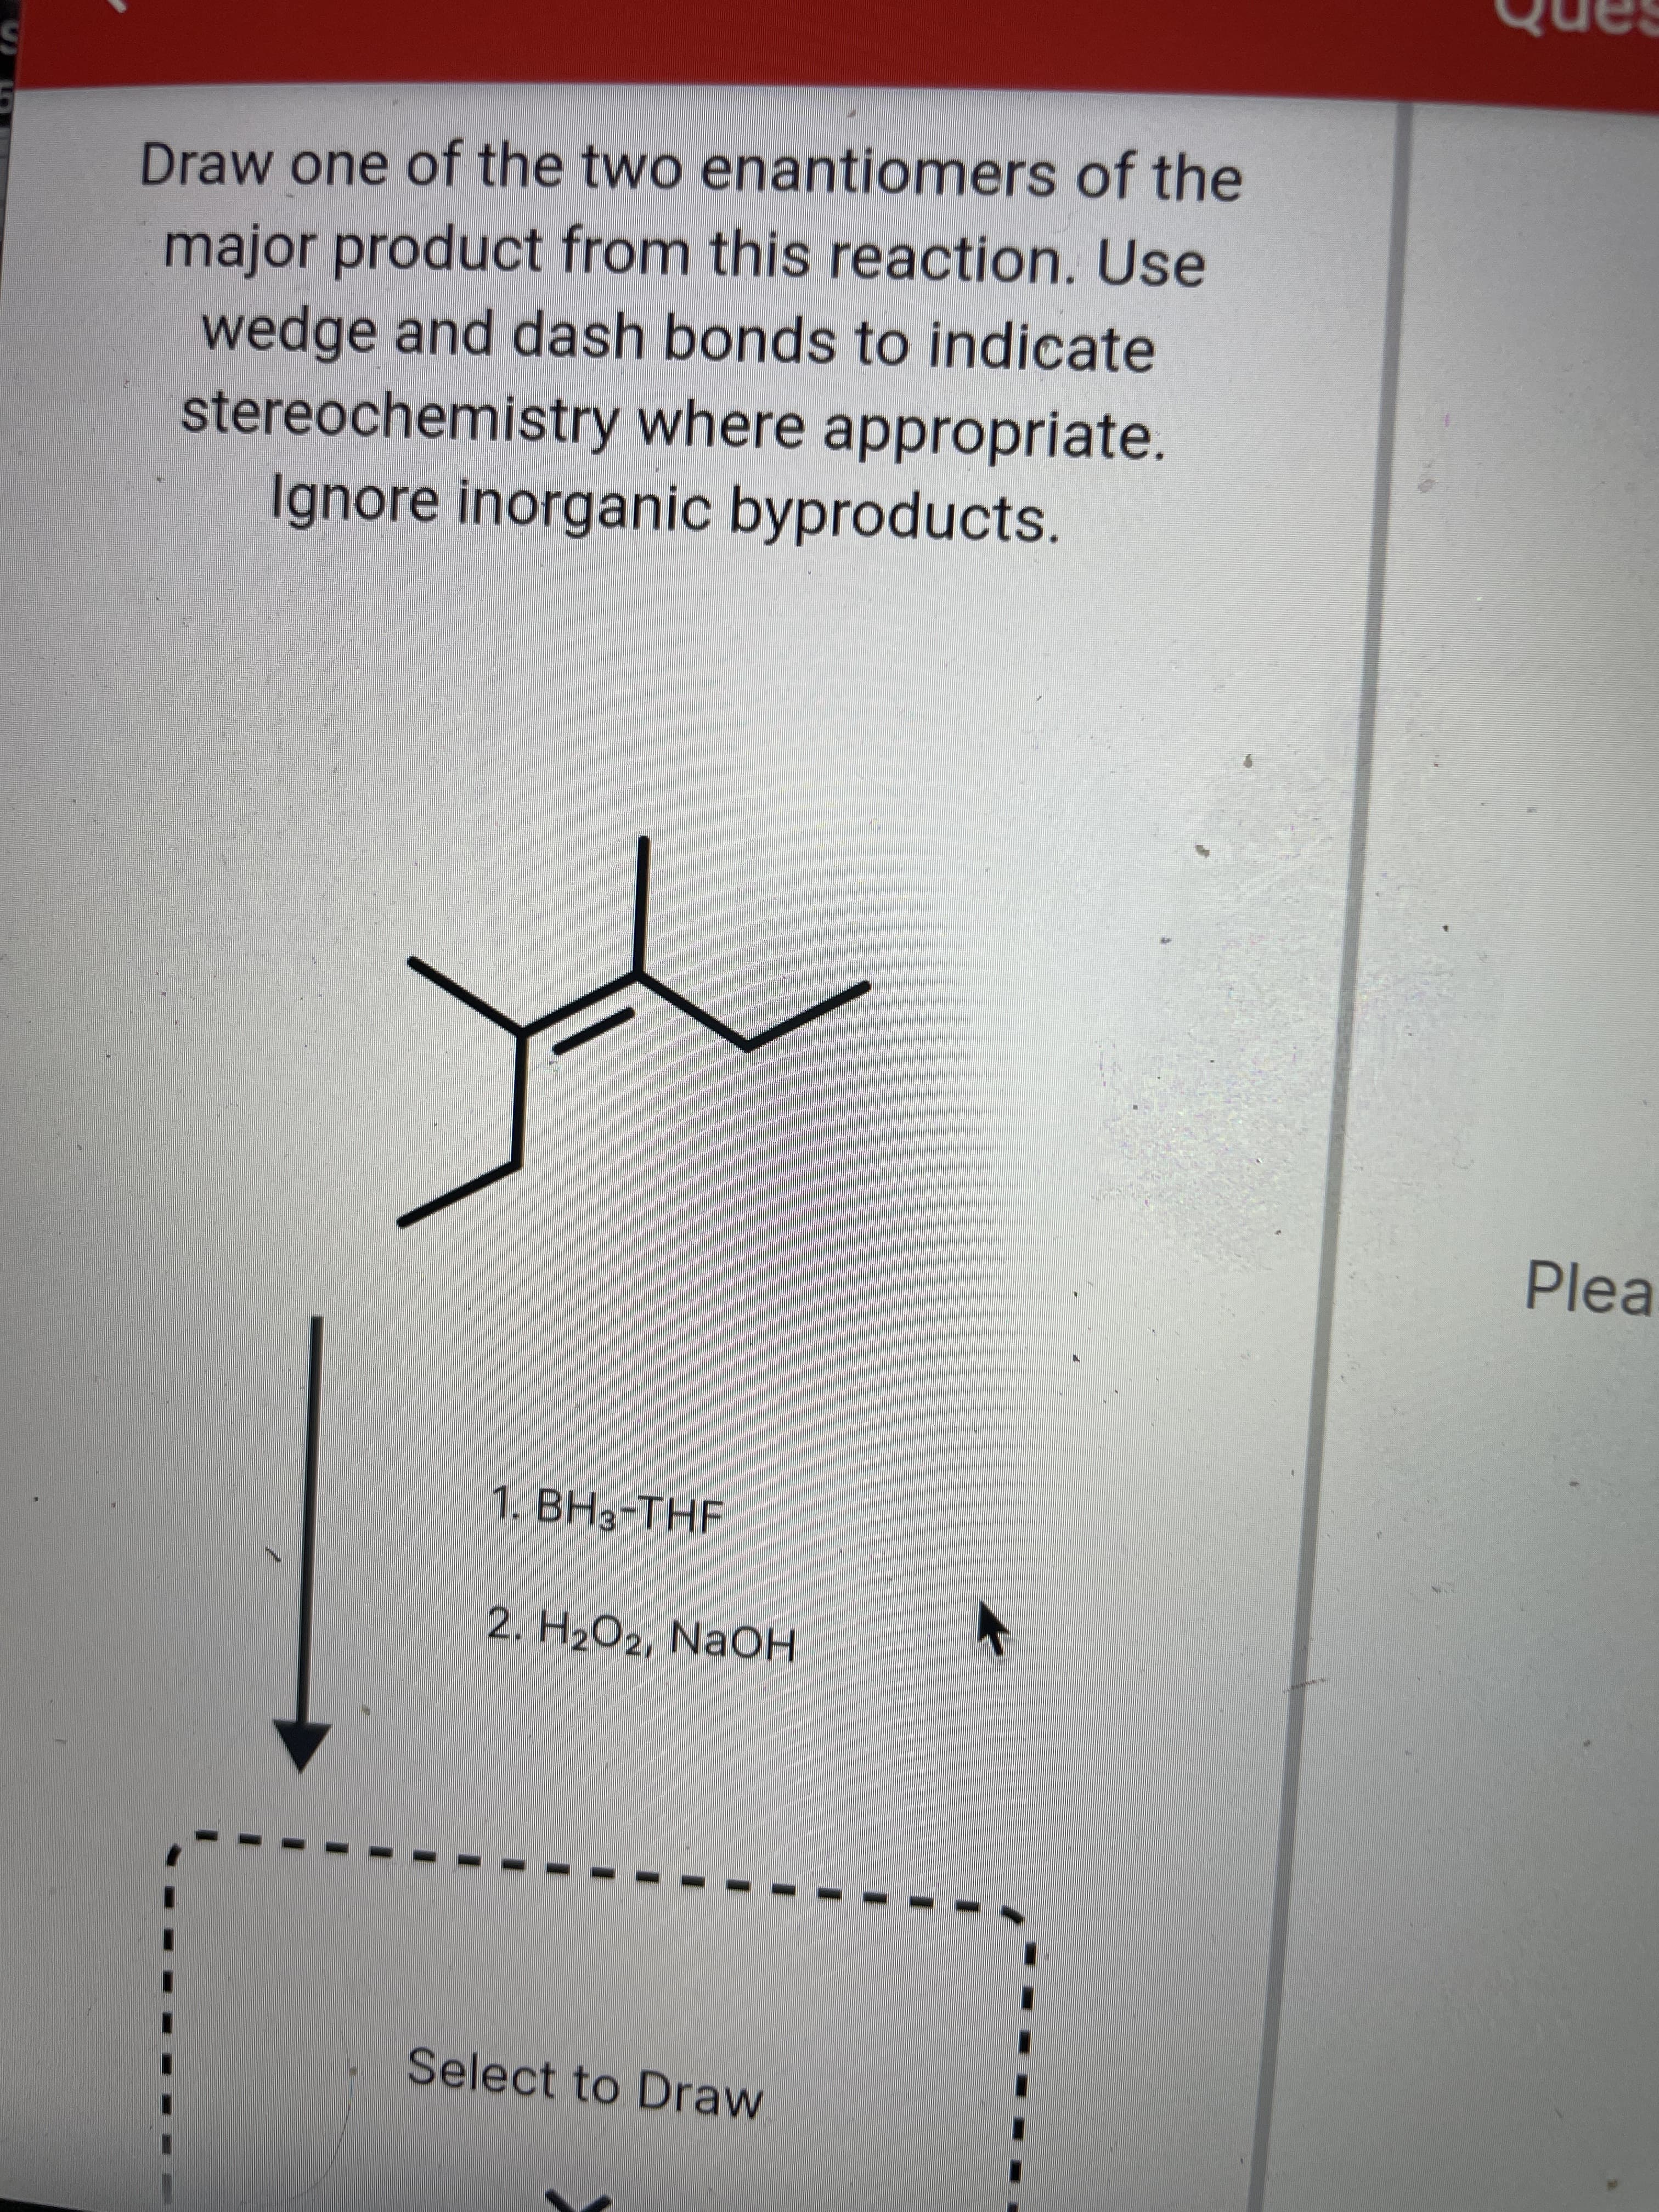 Draw one of the two enantiomers of the
major product from this reaction. Use
wedge and dash bonds to indicate
stereochemistry where appropriate.
Ignore inorganic byproducts.
Plea
1. BH3-THF
2. H2O2, NaOH
Select to Draw
